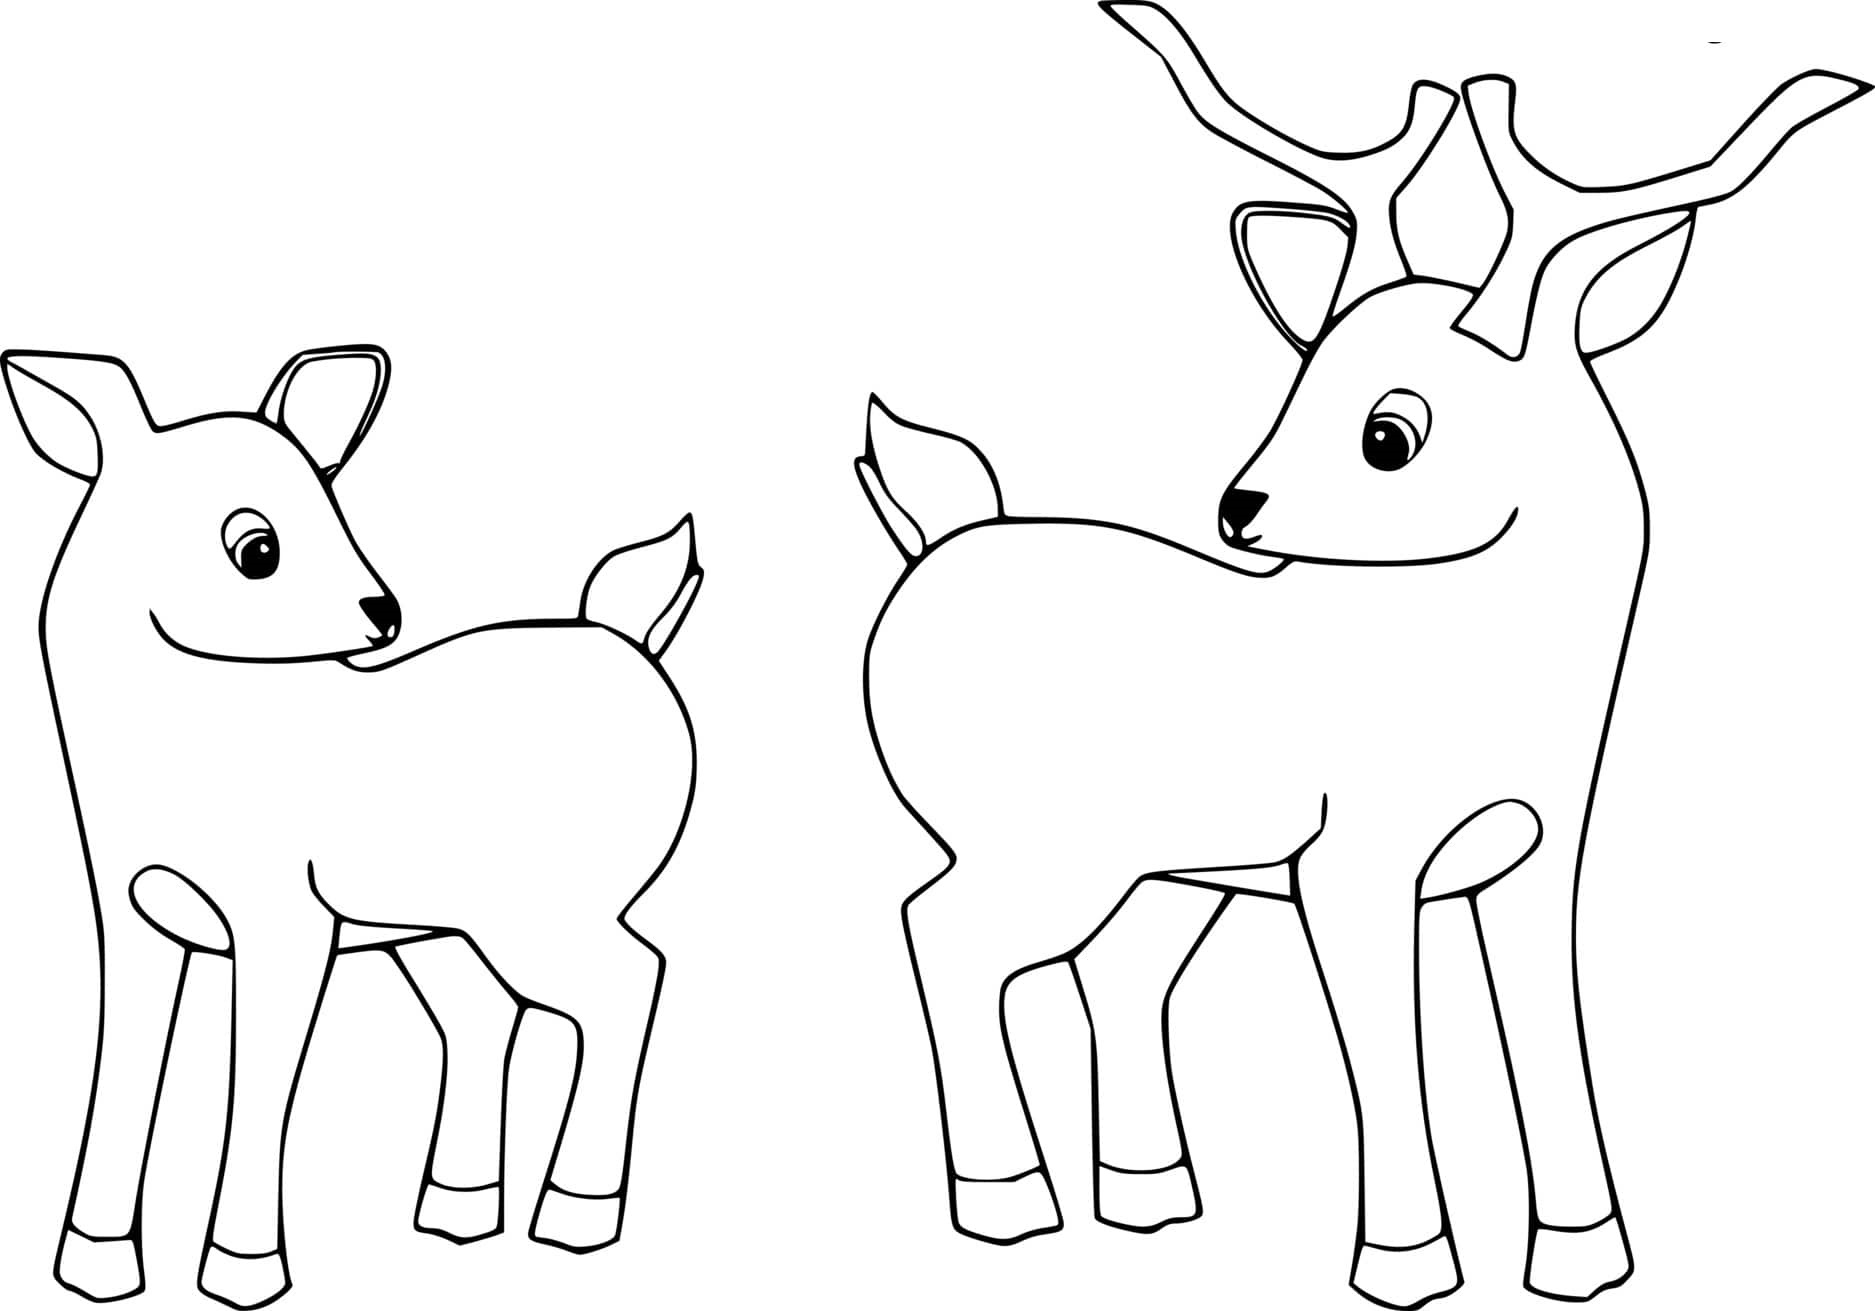 Two Baby Deer Coloring Page